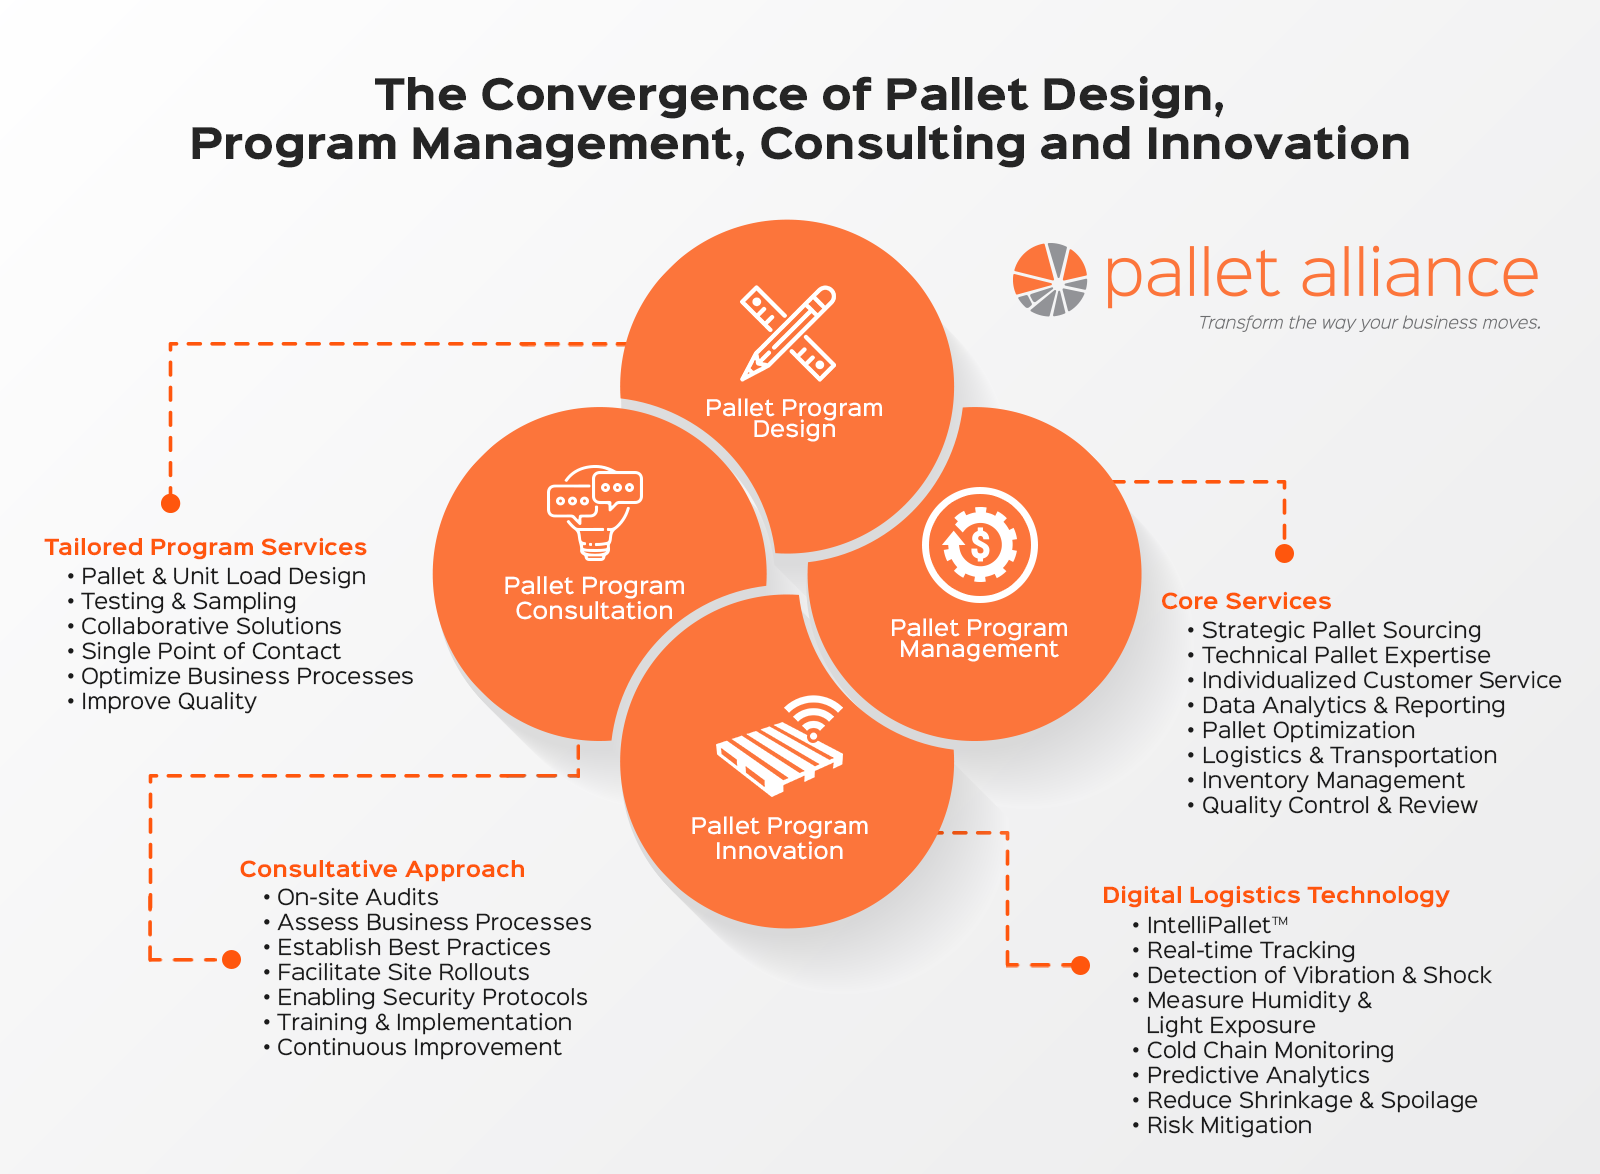 The Convergence of Pallet Design